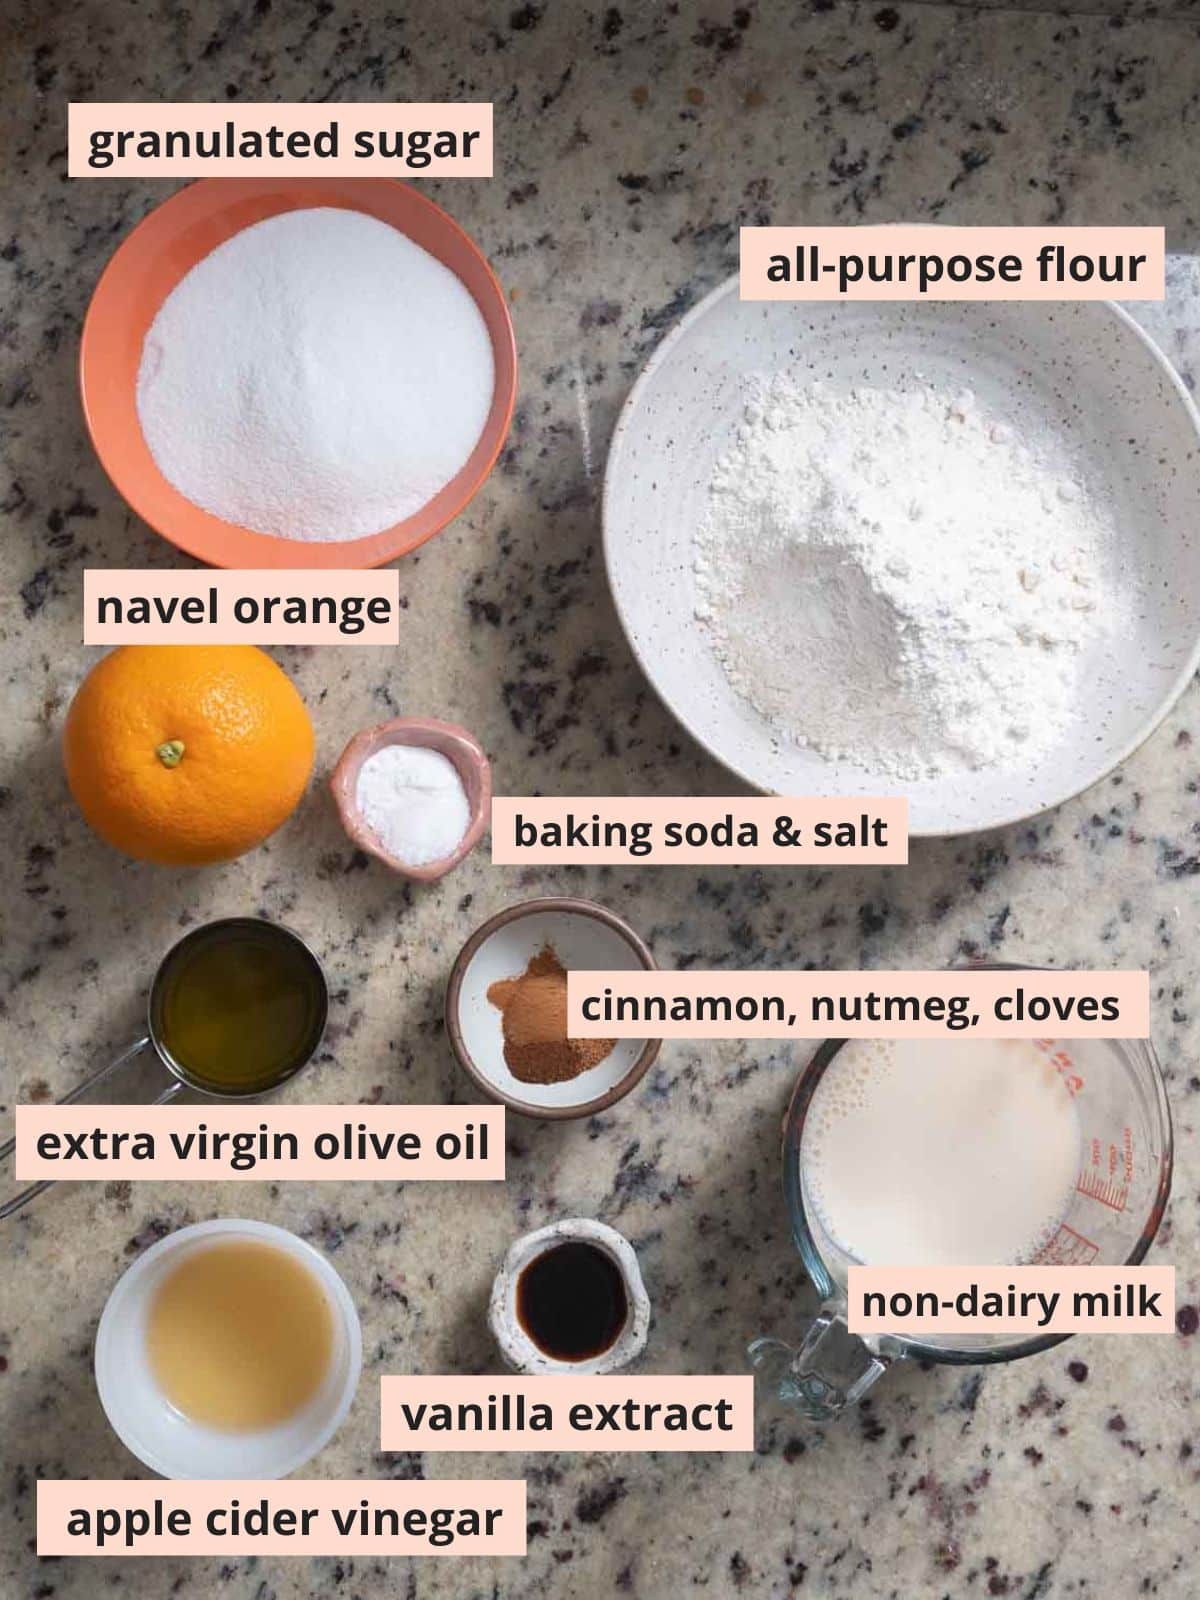 Labeled ingredients used to make the cake.